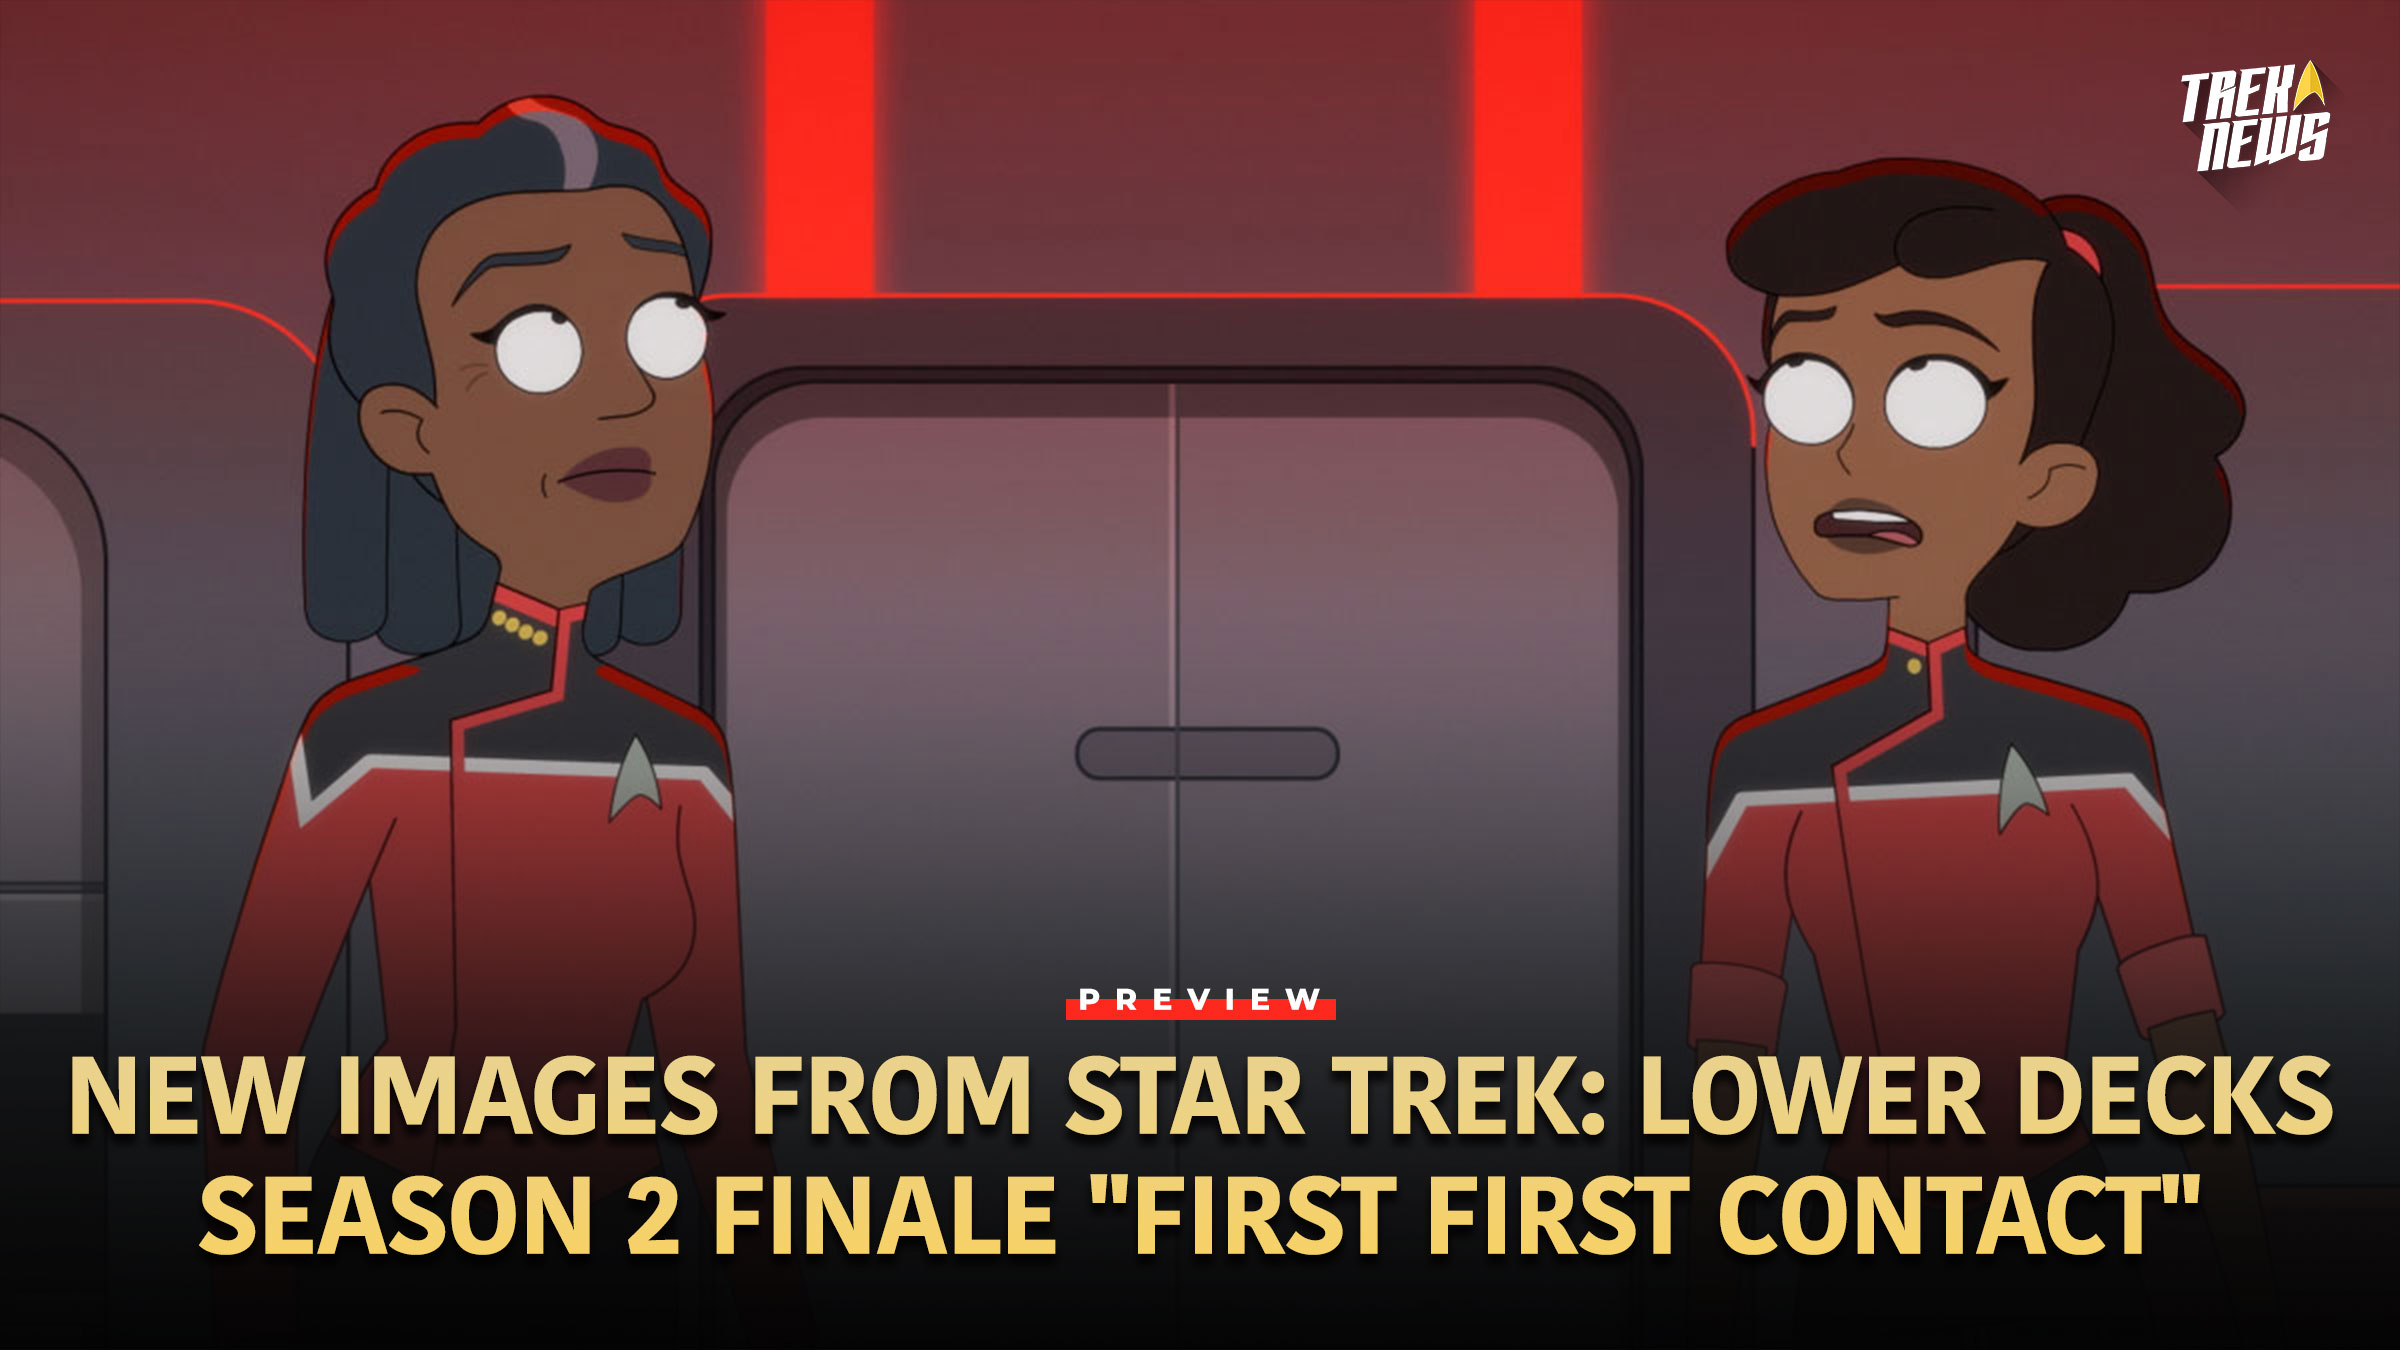 New Images From Star Trek: Lower Decks Season 2 Finale “First First Contact”